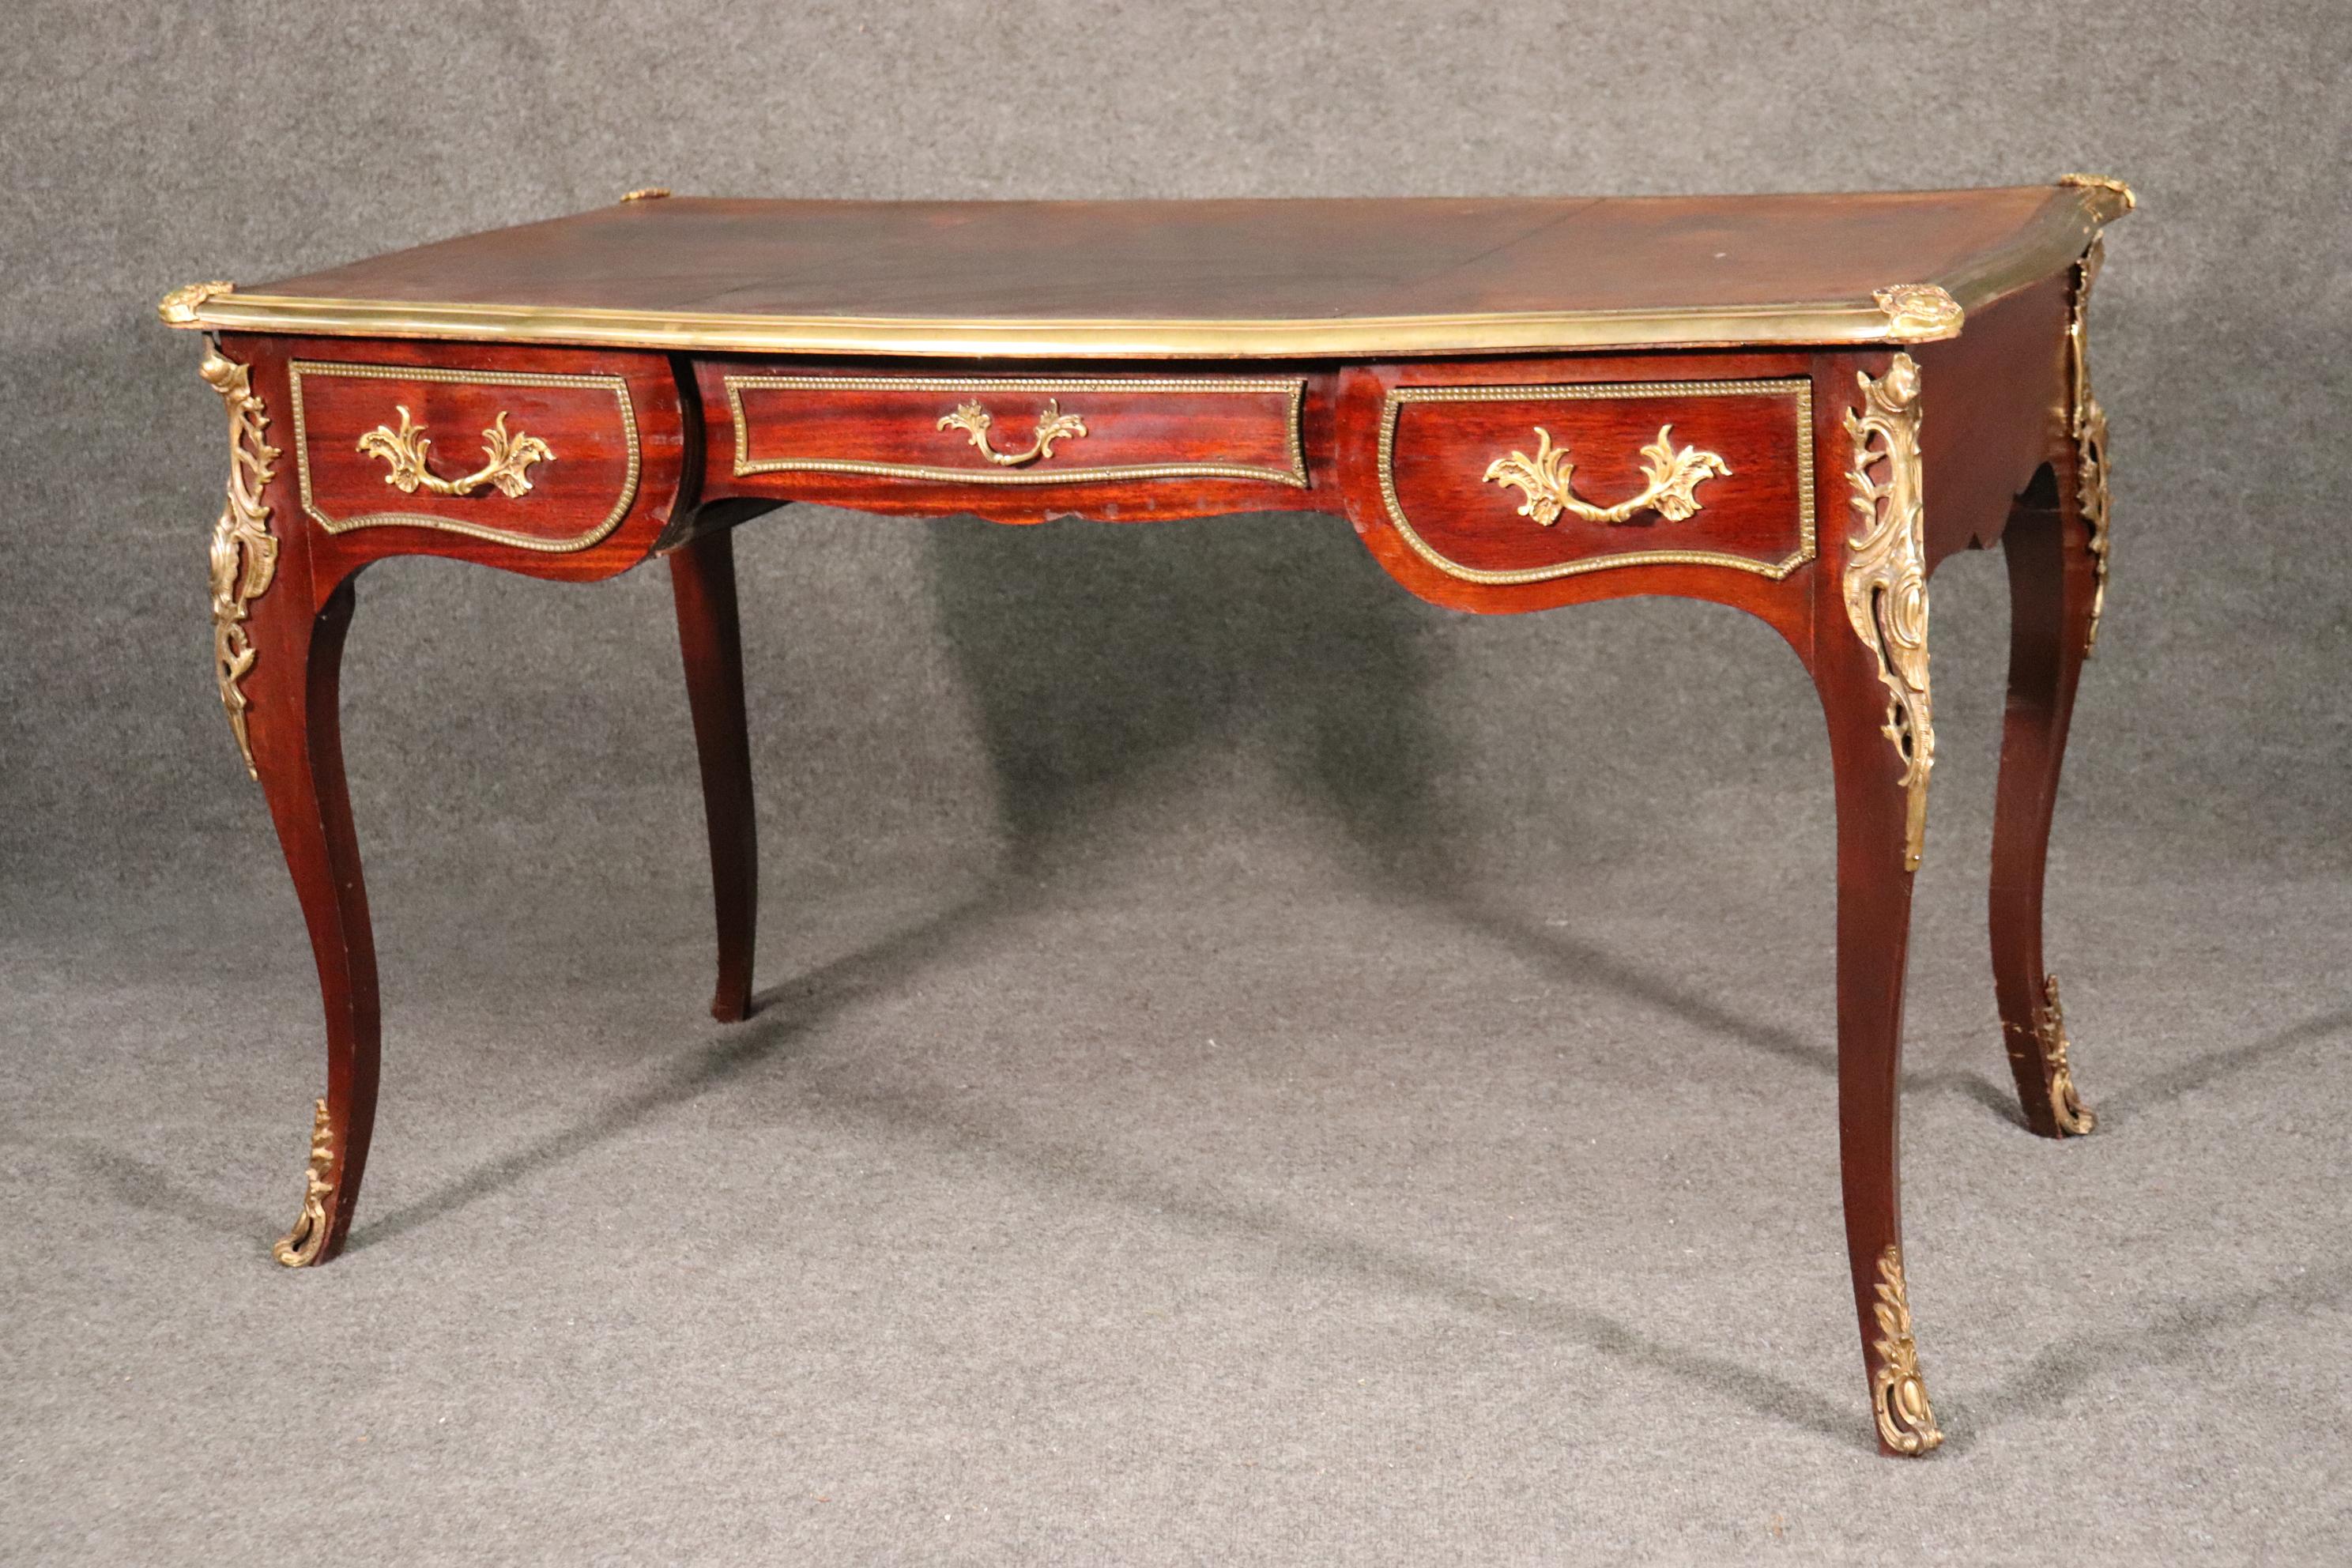 Early 20th Century Bronze Mounted Antique French Louis XV Leather Top Bureau Plat Writing Desk